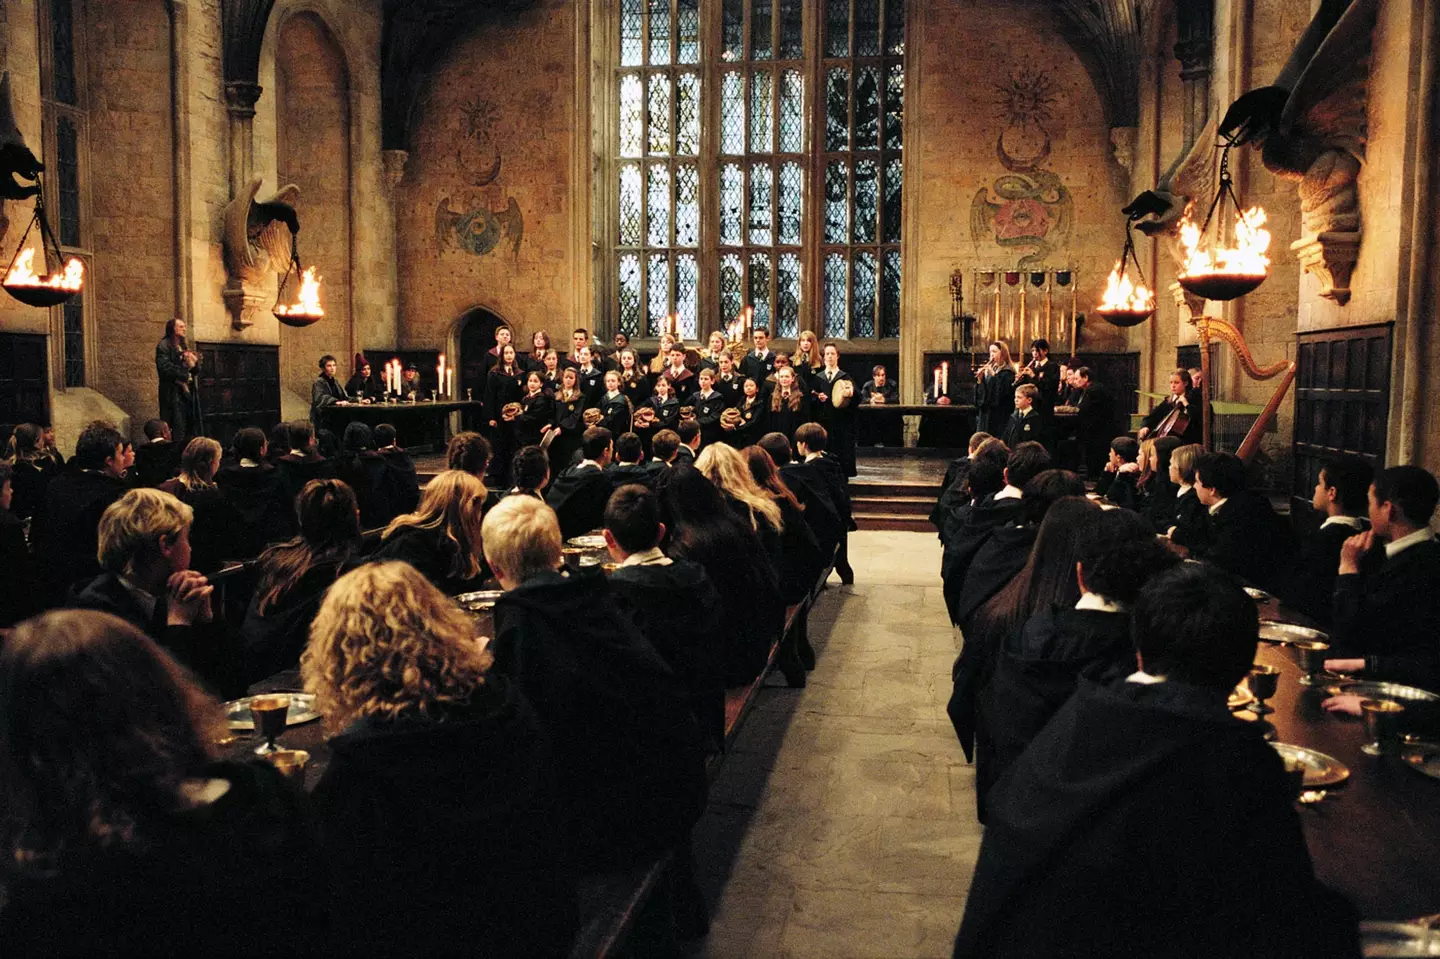 Players will have to partner up with Slytherin students to gain the curse.